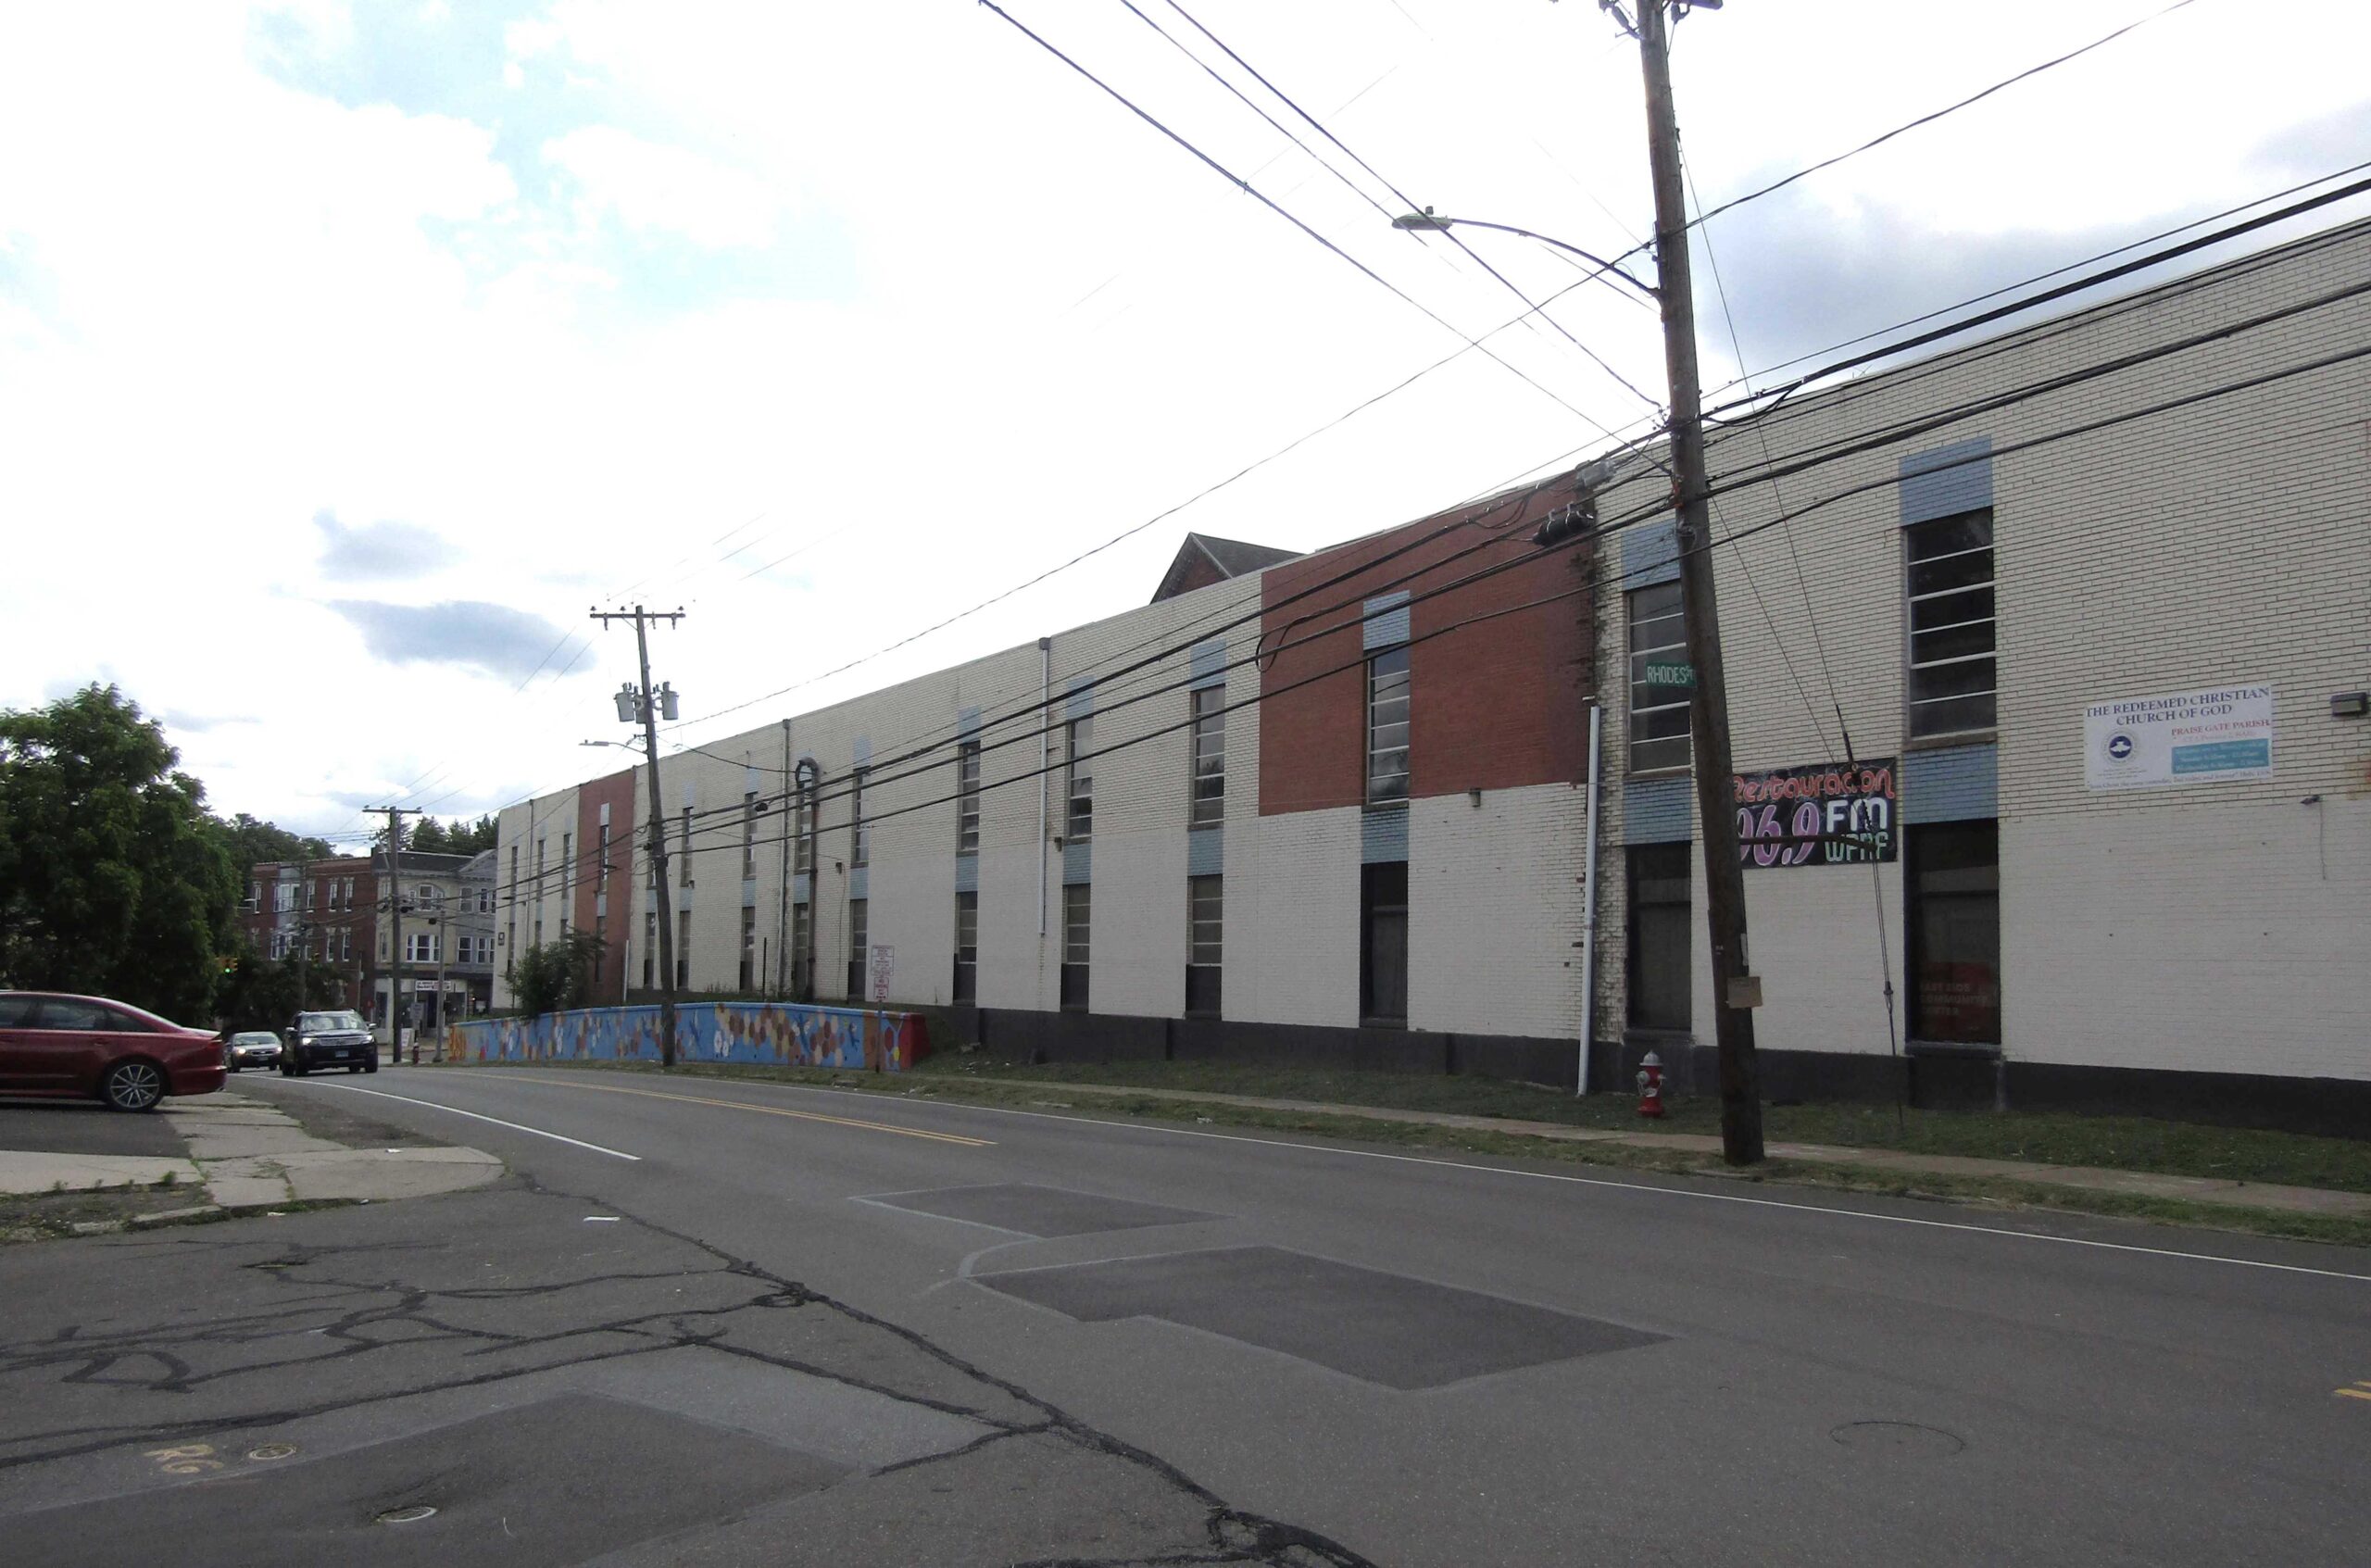 Attorney For Stalled East Street Project Seeks Dialogue With City